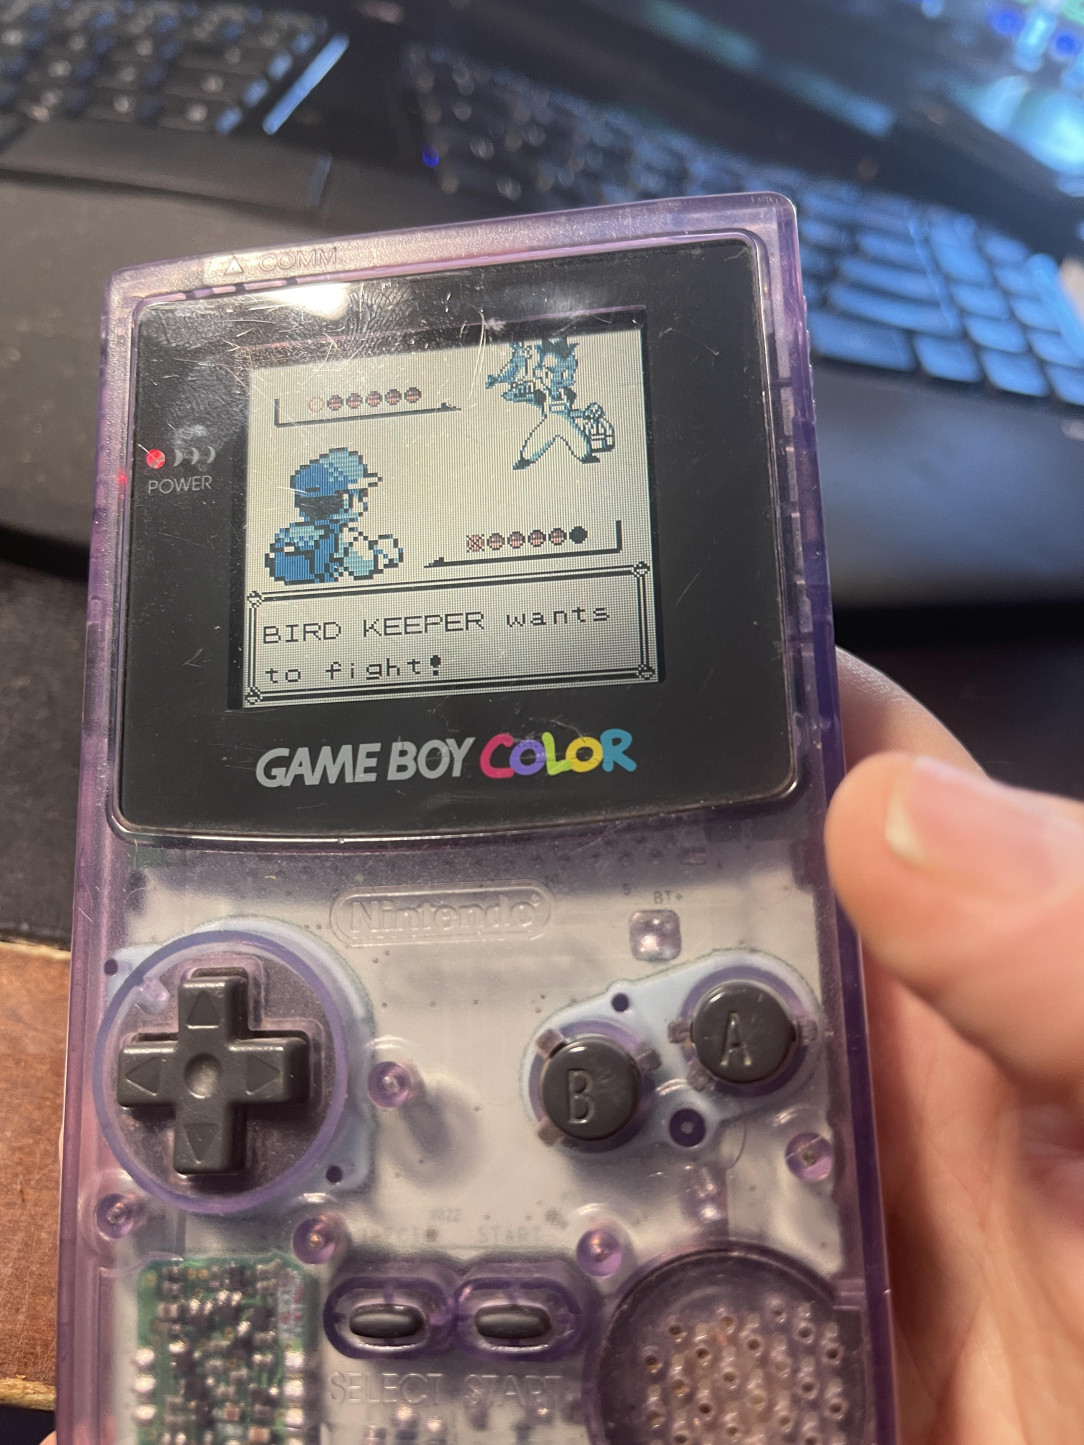 Lil throwback to 1995. Game boy in atomic purple and works great 🐕